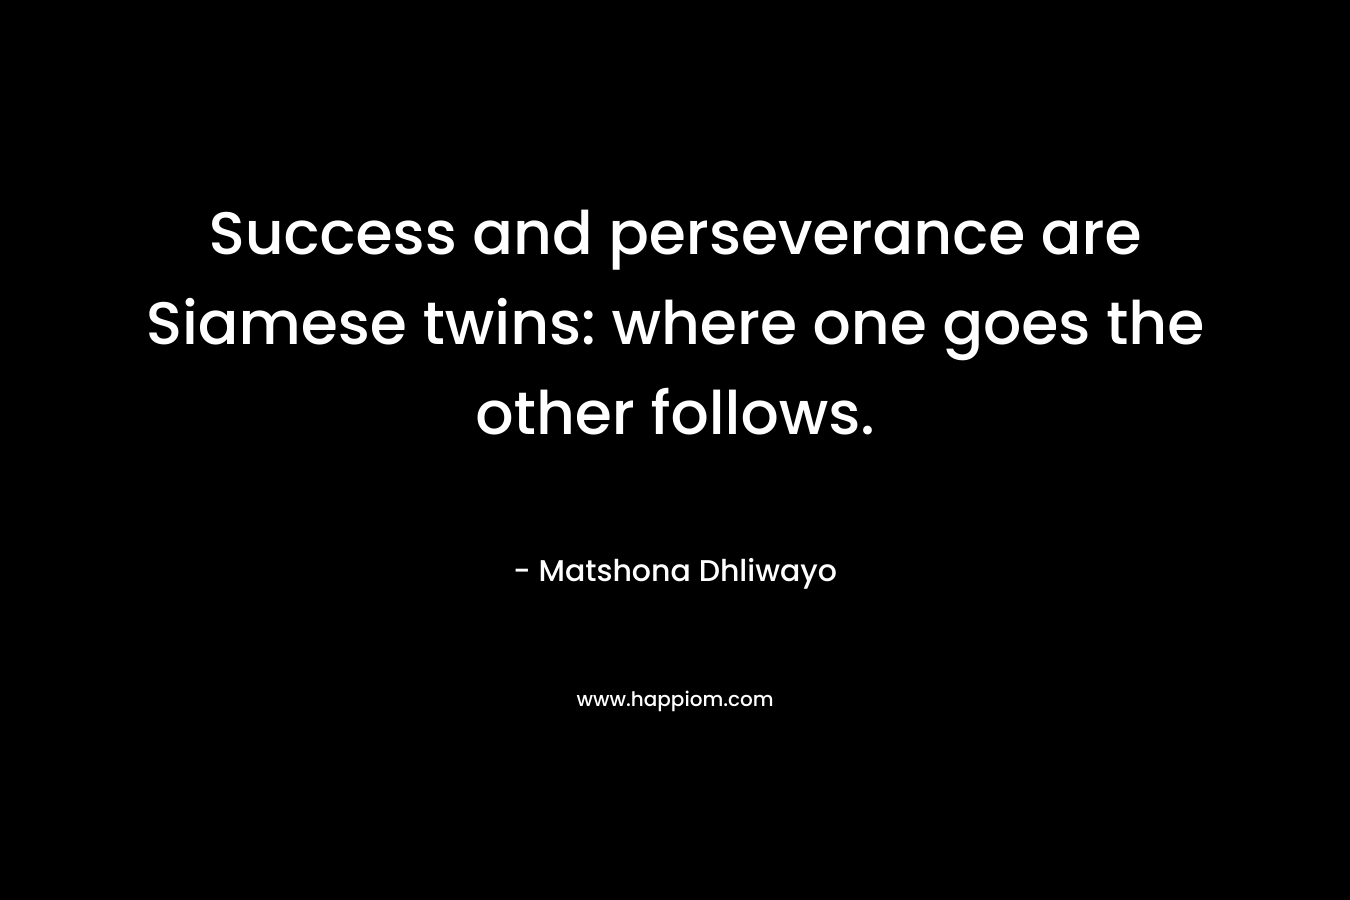 Success and perseverance are Siamese twins: where one goes the other follows. – Matshona Dhliwayo